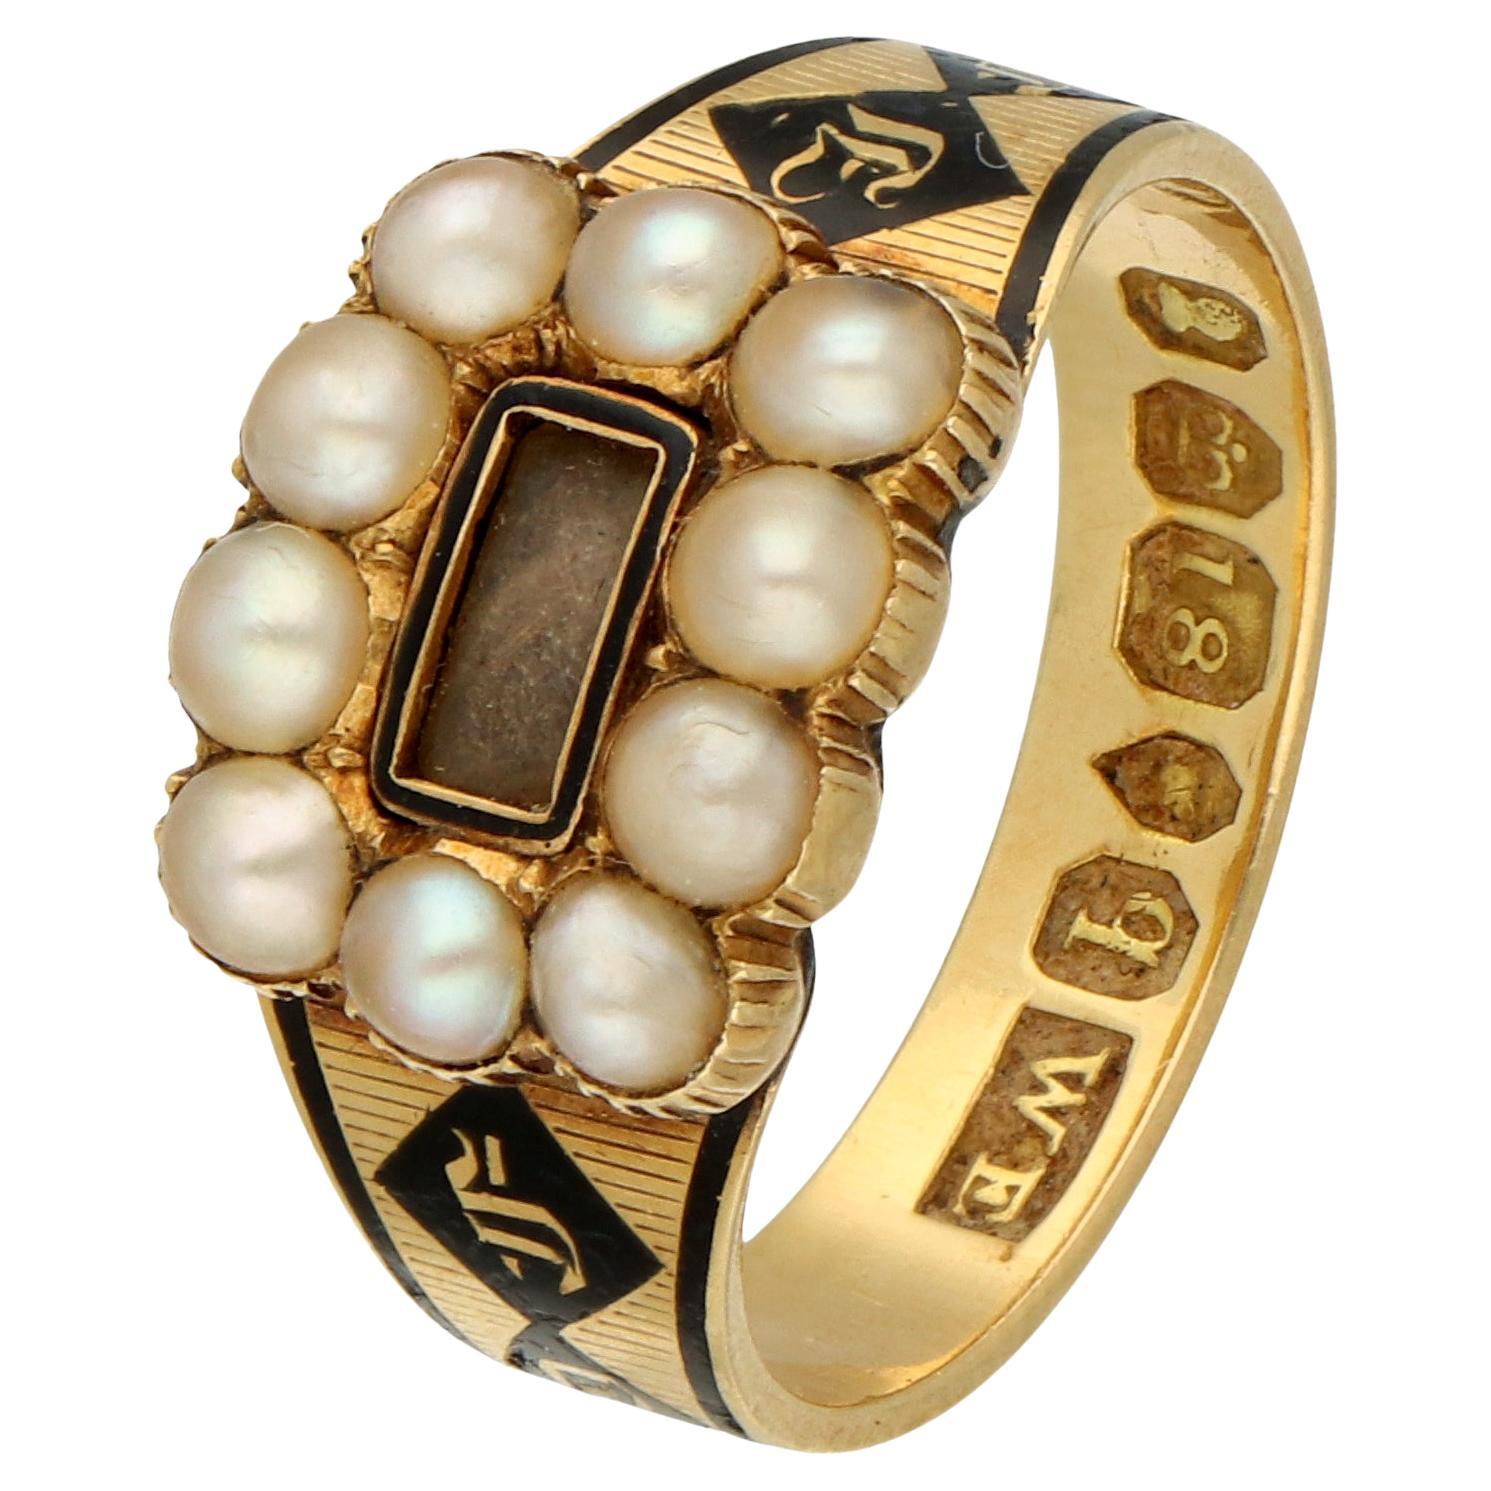 Antique English 18K Gold Memorial Ring from 1831 with Pearls and Black Enamel For Sale